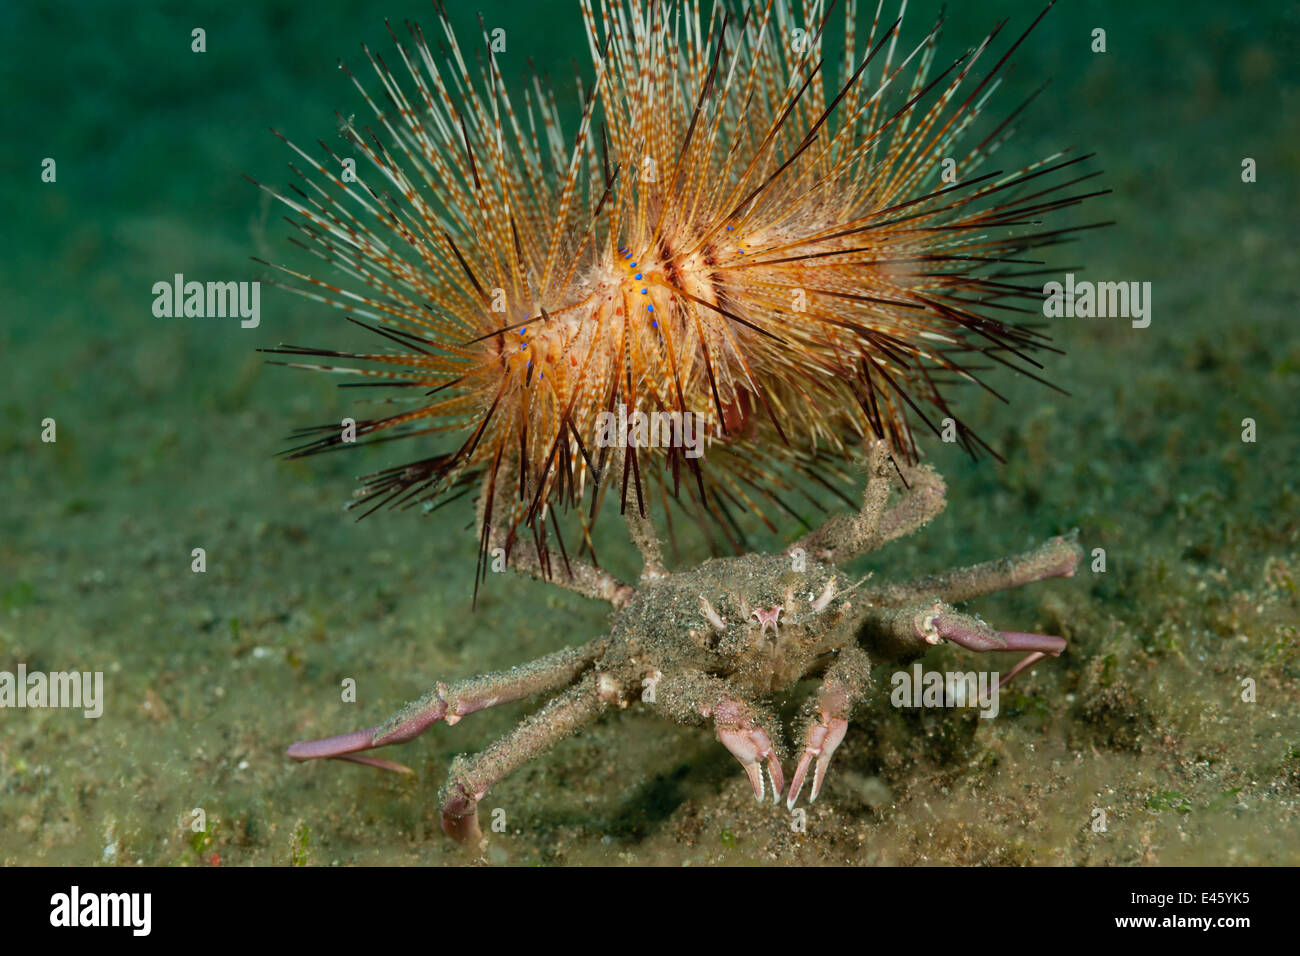 Carrier / Sea urchin crab (Dorippe frascone) carrying a fire urchin as a deterrent to predators. Lembeh Strait, North Sulawesi, Indonesia Stock Photo